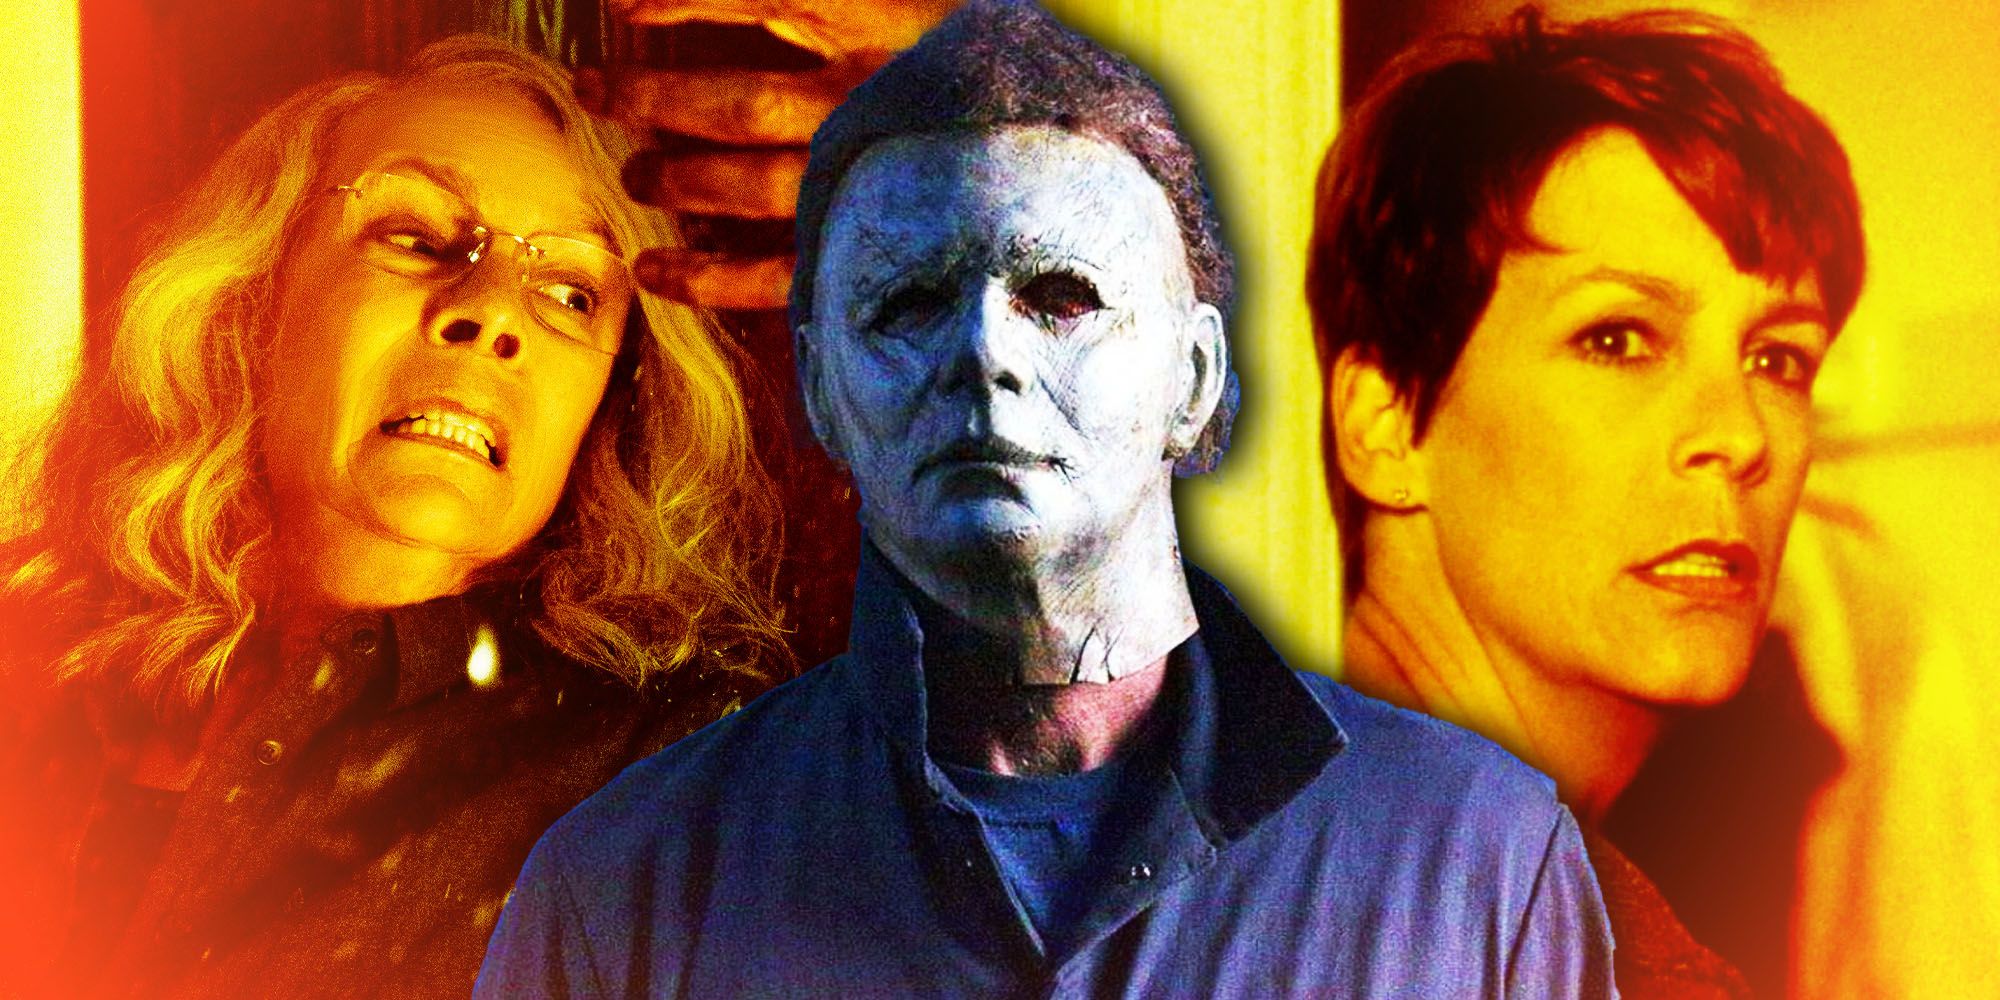 Jamie Lee Curtis as Laurie Strode in Halloween 2018 and Halloween H20 with Michael Myers